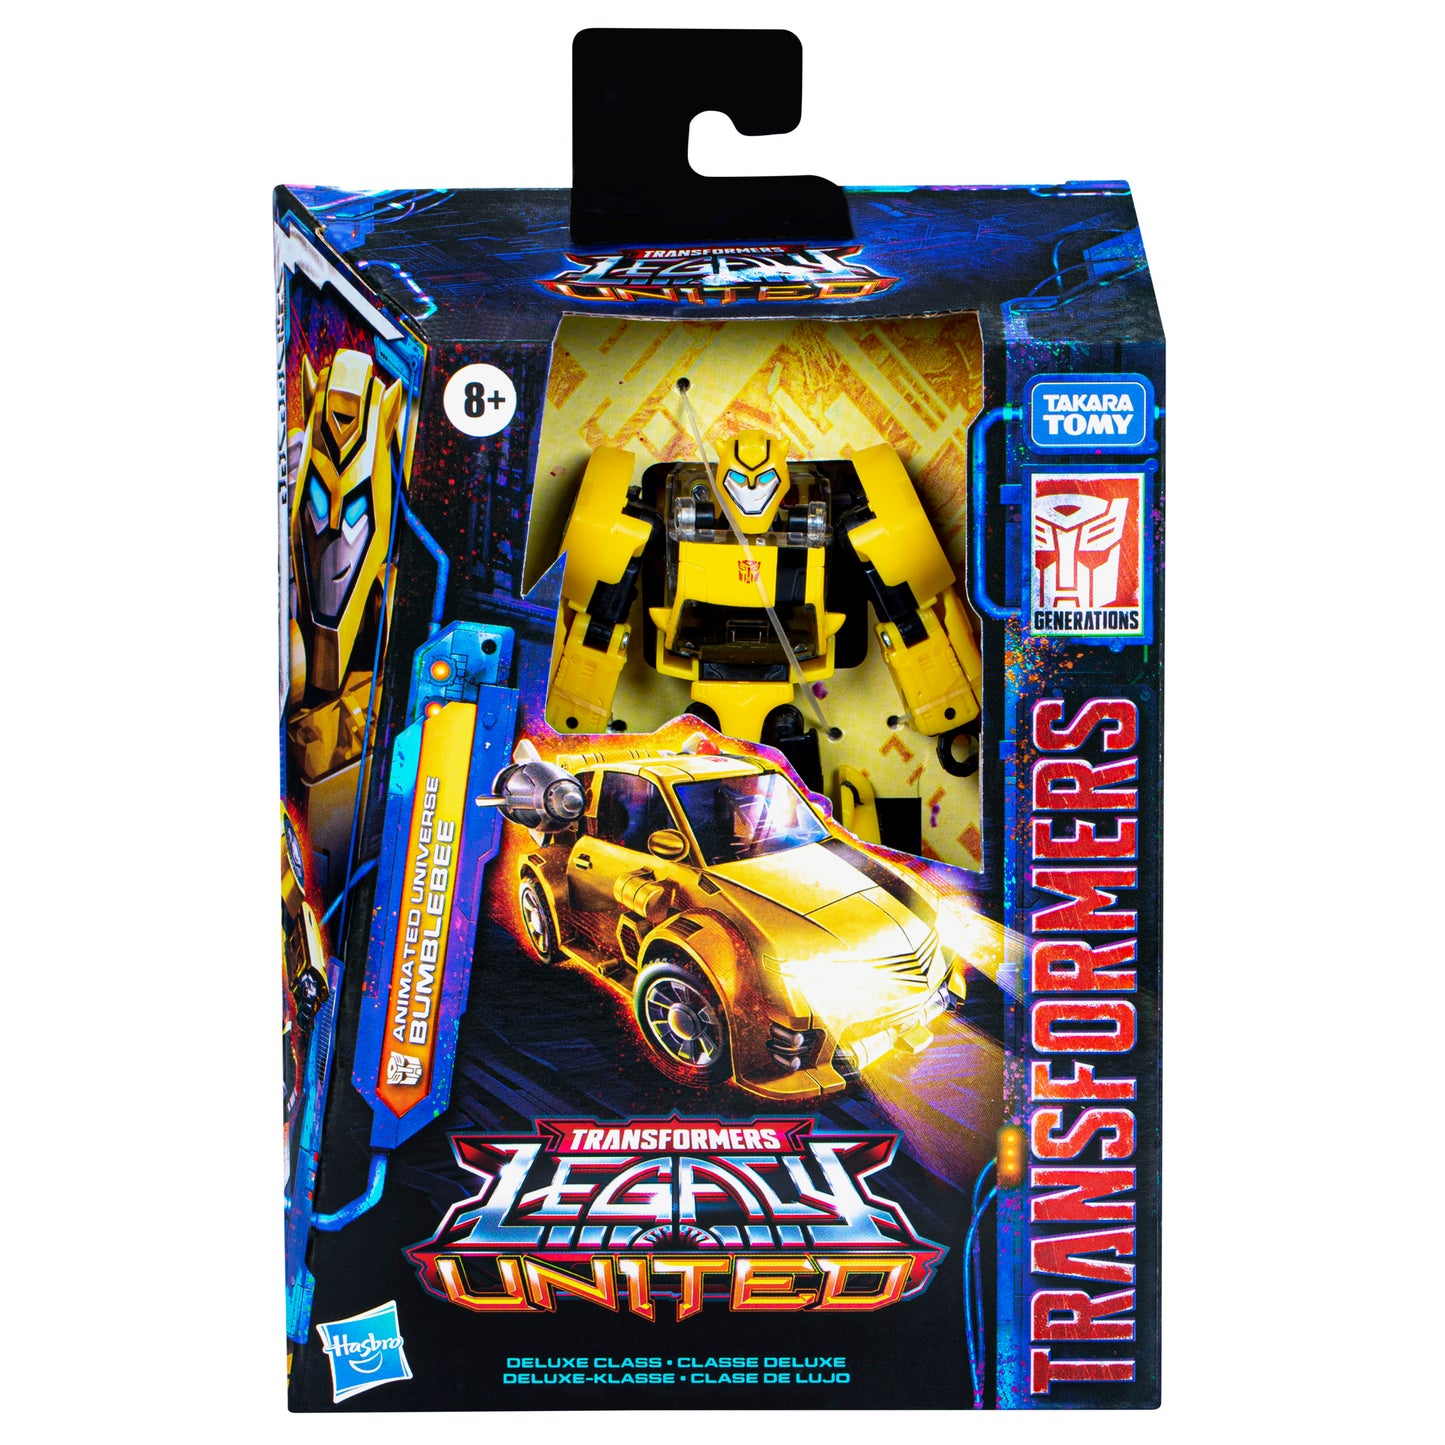 Transformers Legacy United Deluxe Animated Universe Bumblebee 5.5” Action Figure, 8+ heretoserveyou 3